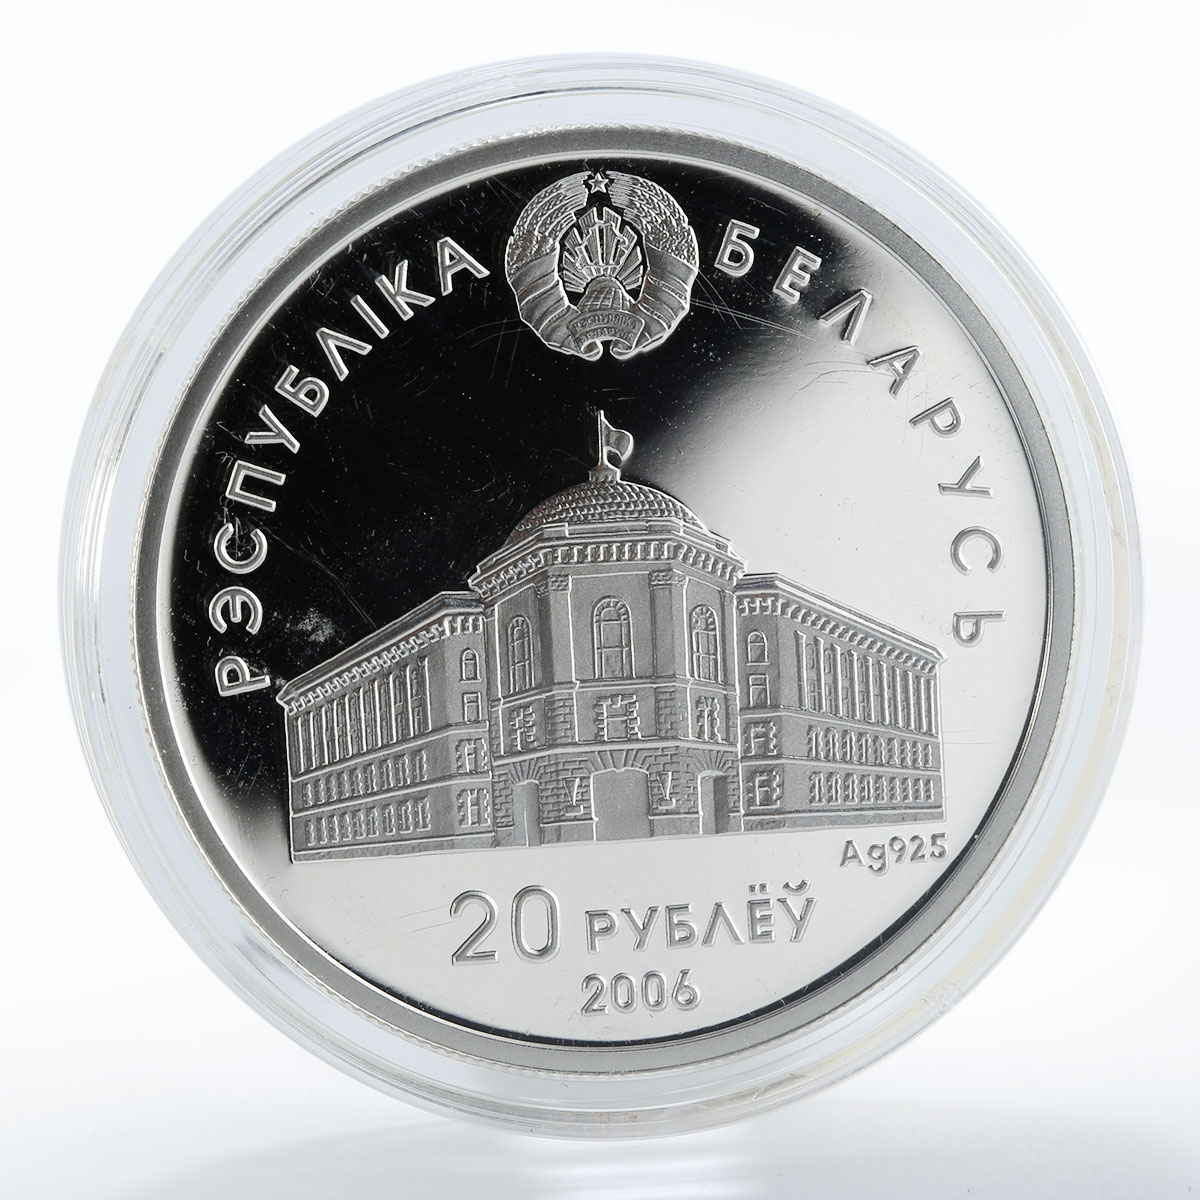 Belarus 20 rubles Commonwealth of Independent States 15 years silver proof 2006